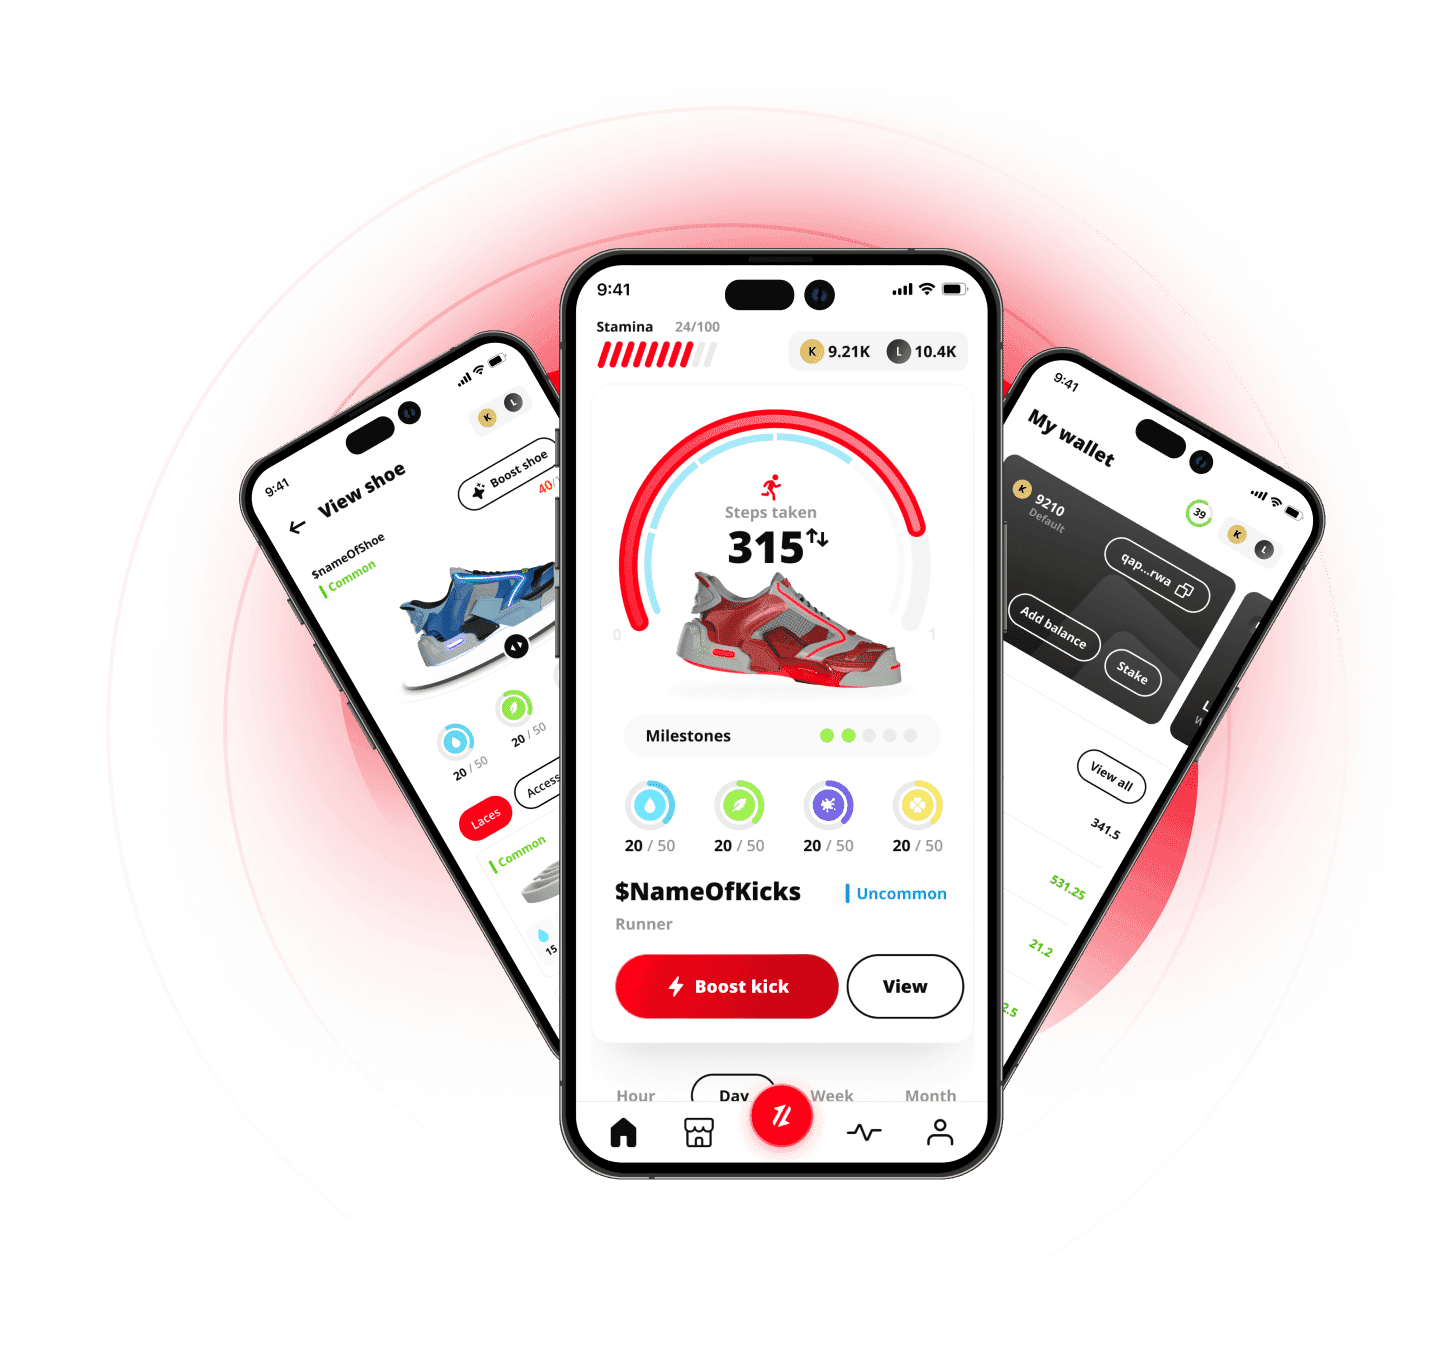 GetKicks, the Web3 app for sneaker enthusiasts. 3D NFT venture into the world "move to earn" while collecting futuristic and stylish footwear